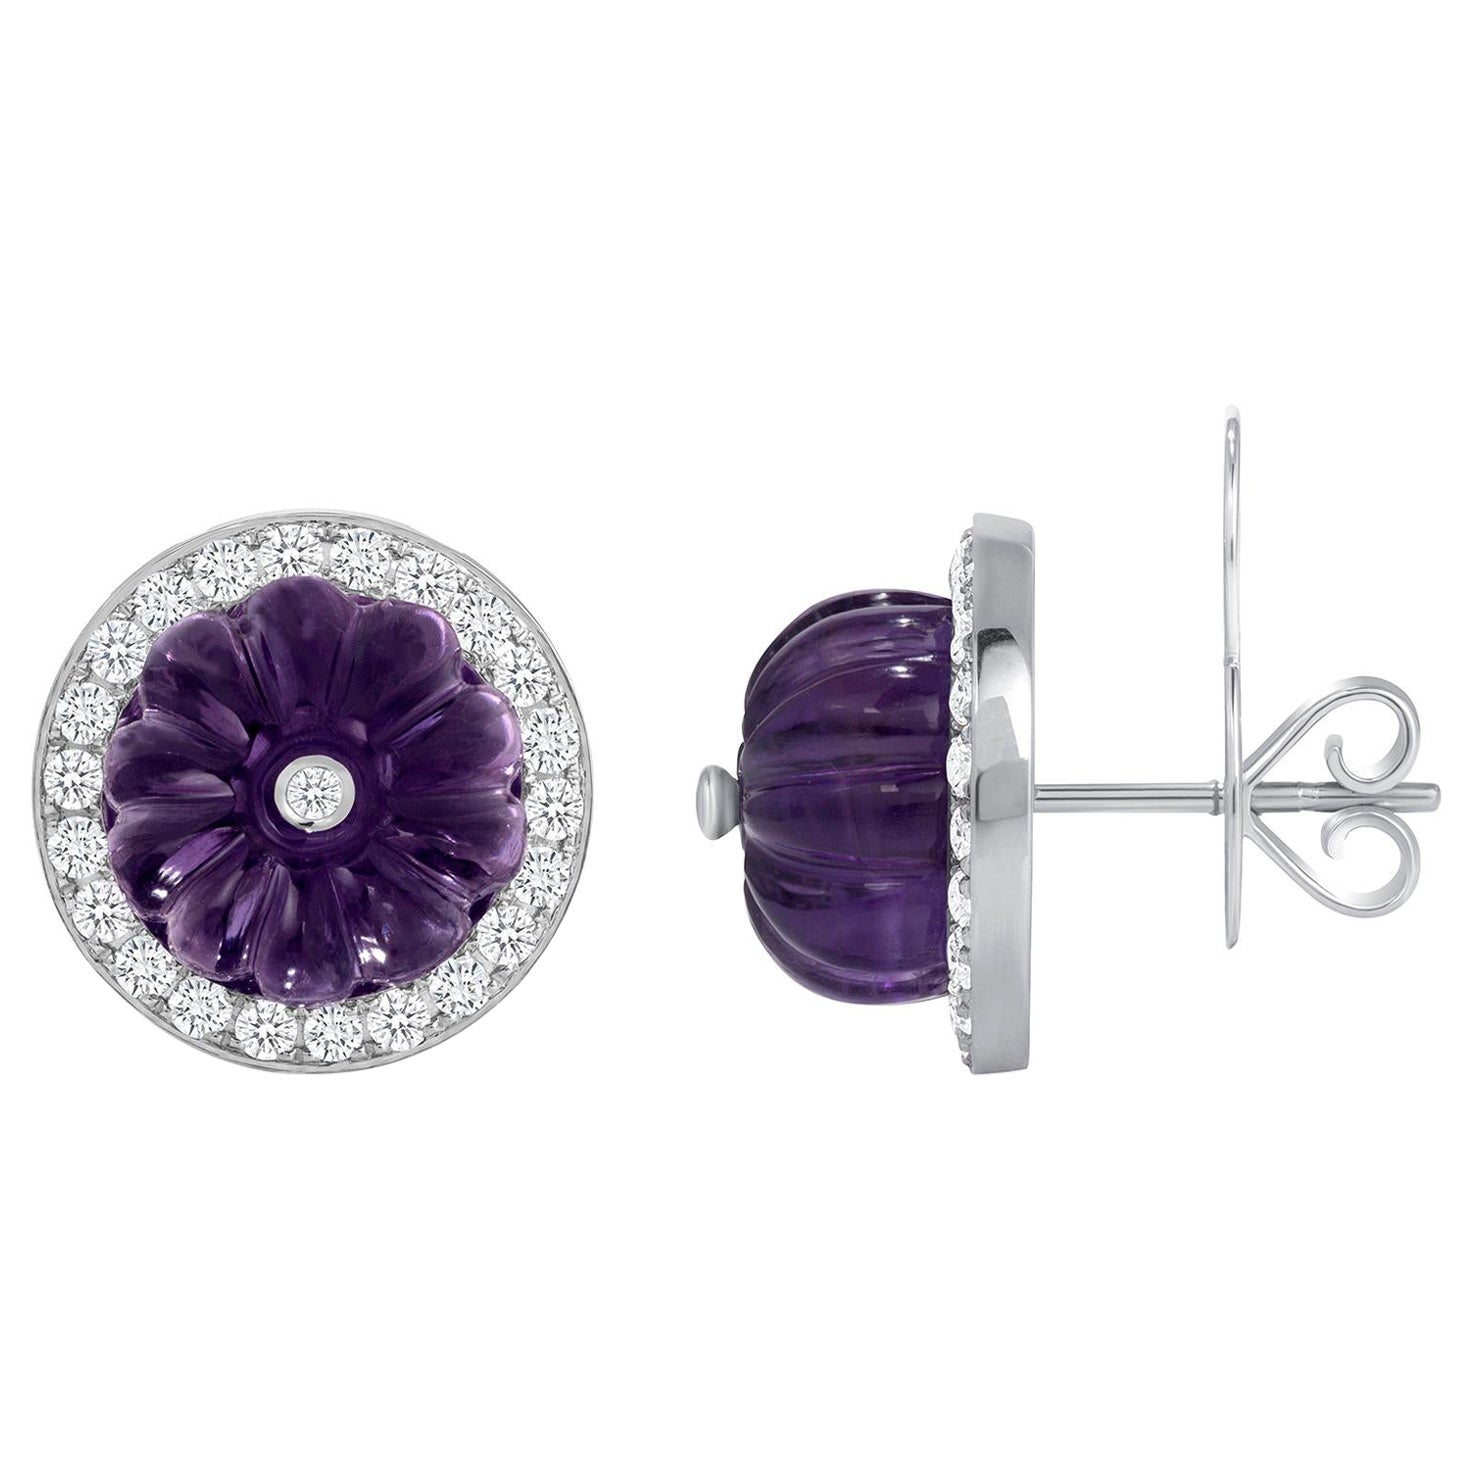 14K White Gold Lux Art Deco Lux Diamond & Carved Amethyst Earring